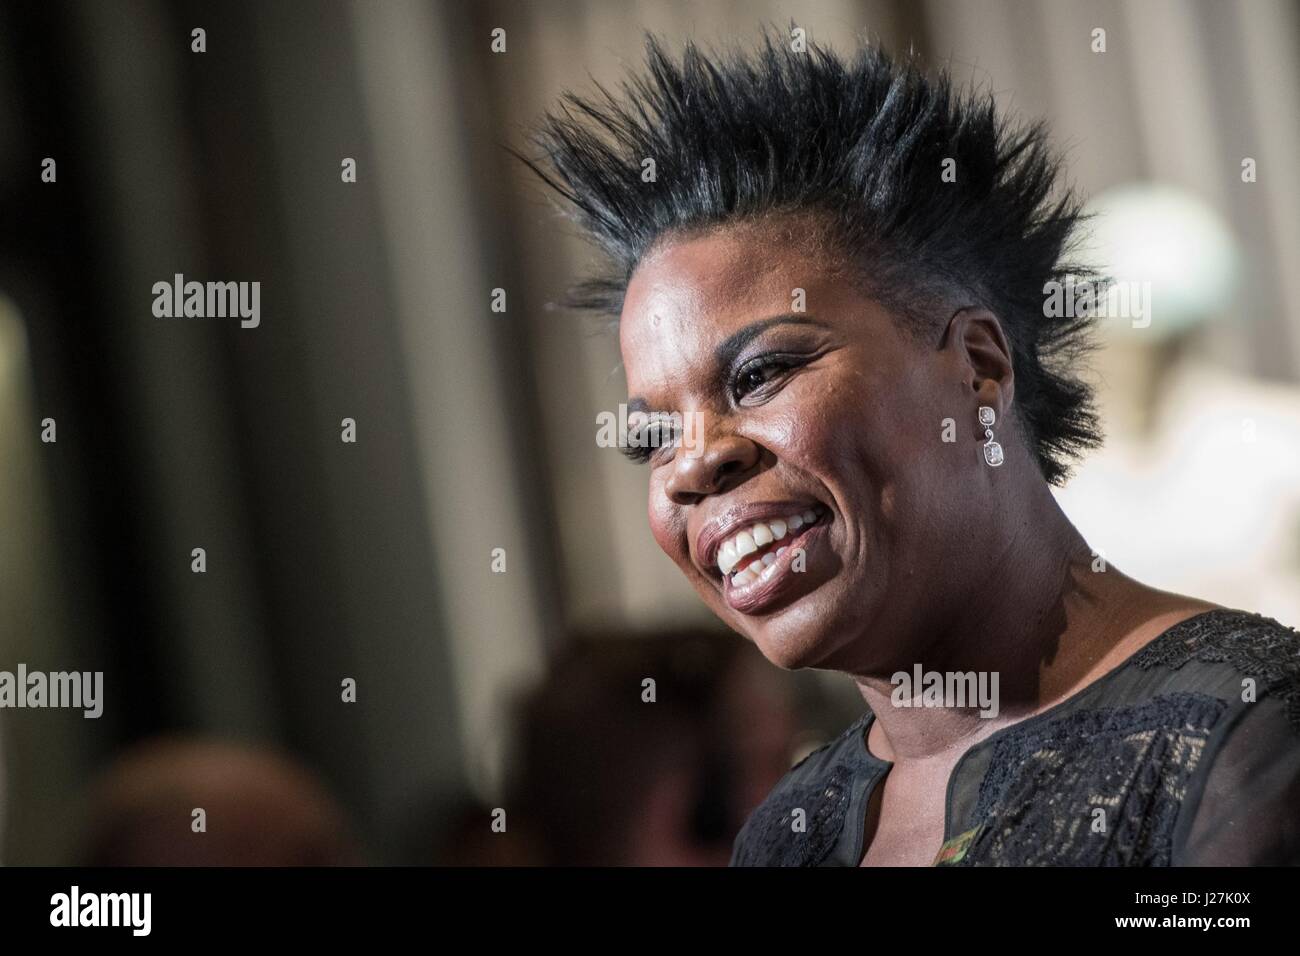 New York, NY, USA. 25th Apr, 2017. Leslie Jones at arrivals for TIME 100 Gala Dinner 2017, Jazz at Lincoln Center's Frederick P. Rose Hall, New York, NY April 25, 2017. Credit: Steven Ferdman/Everett Collection/Alamy Live News Stock Photo